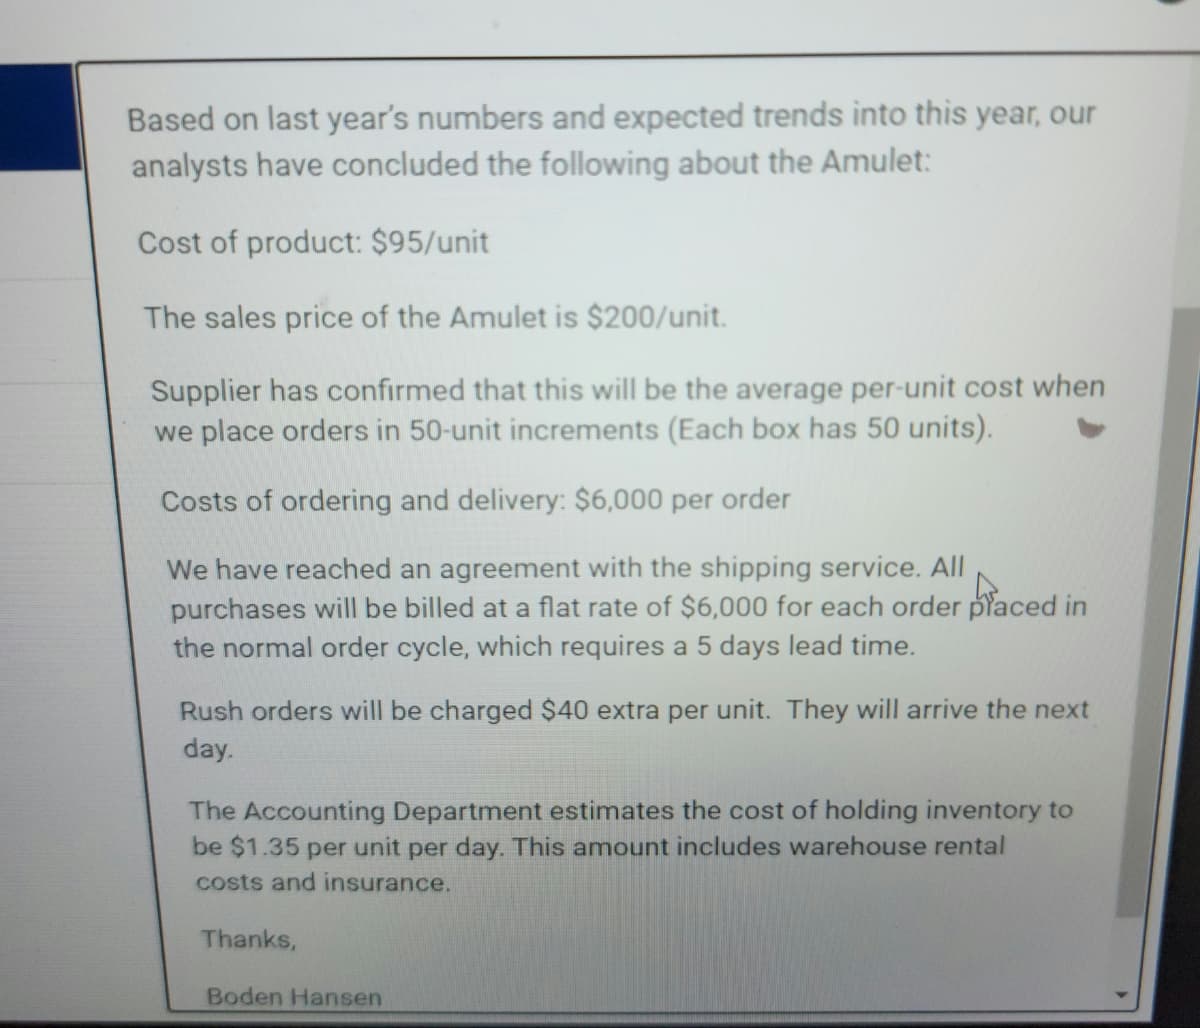 Based on last year's numbers and expected trends into this year, our
analysts have concluded the following about the Amulet:
Cost of product: $95/unit
The sales price of the Amulet is $200/unit.
Supplier has confirmed that this will be the average per-unit cost when
we place orders in 50-unit increments (Each box has 50 units).
Costs of ordering and delivery: $6,000 per order
We have reached an agreement with the shipping service. All
purchases will be billed at a flat rate of $6,000 for each order placed in
the normal order cycle, which requires a 5 days lead time.
Rush orders will be charged $40 extra per unit. They will arrive the next
day.
The Accounting Department estimates the cost of holding inventory to
be $1.35 per unit per day. This amount includes warehouse rental
costs and insurance.
Thanks,
Boden Hansen